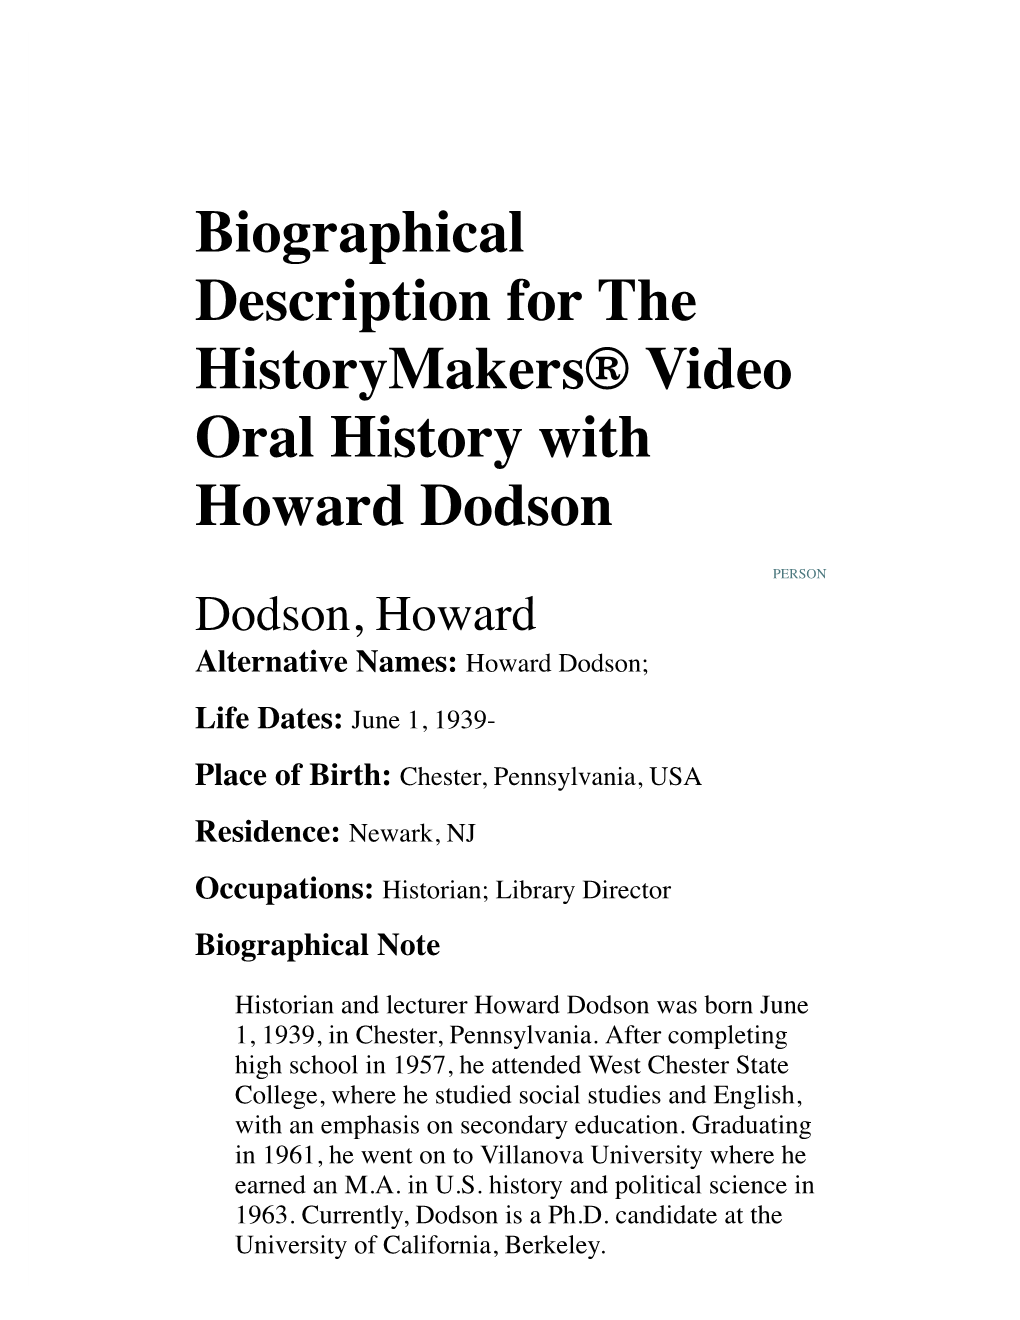 Biographical Description for the Historymakers® Video Oral History with Howard Dodson